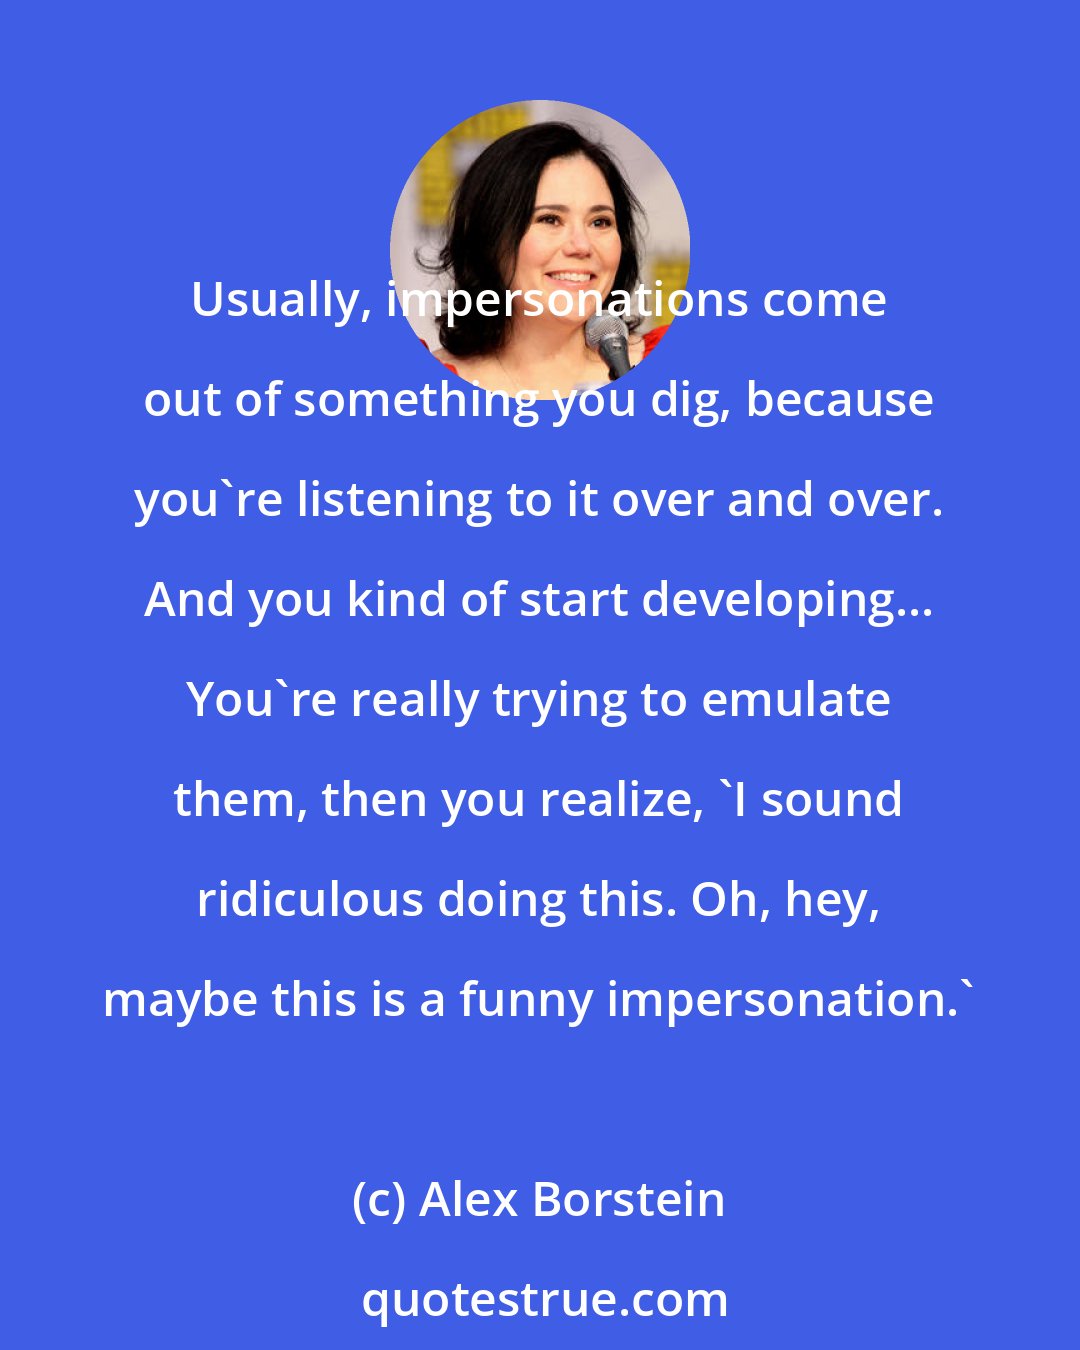 Alex Borstein: Usually, impersonations come out of something you dig, because you're listening to it over and over. And you kind of start developing... You're really trying to emulate them, then you realize, 'I sound ridiculous doing this. Oh, hey, maybe this is a funny impersonation.'